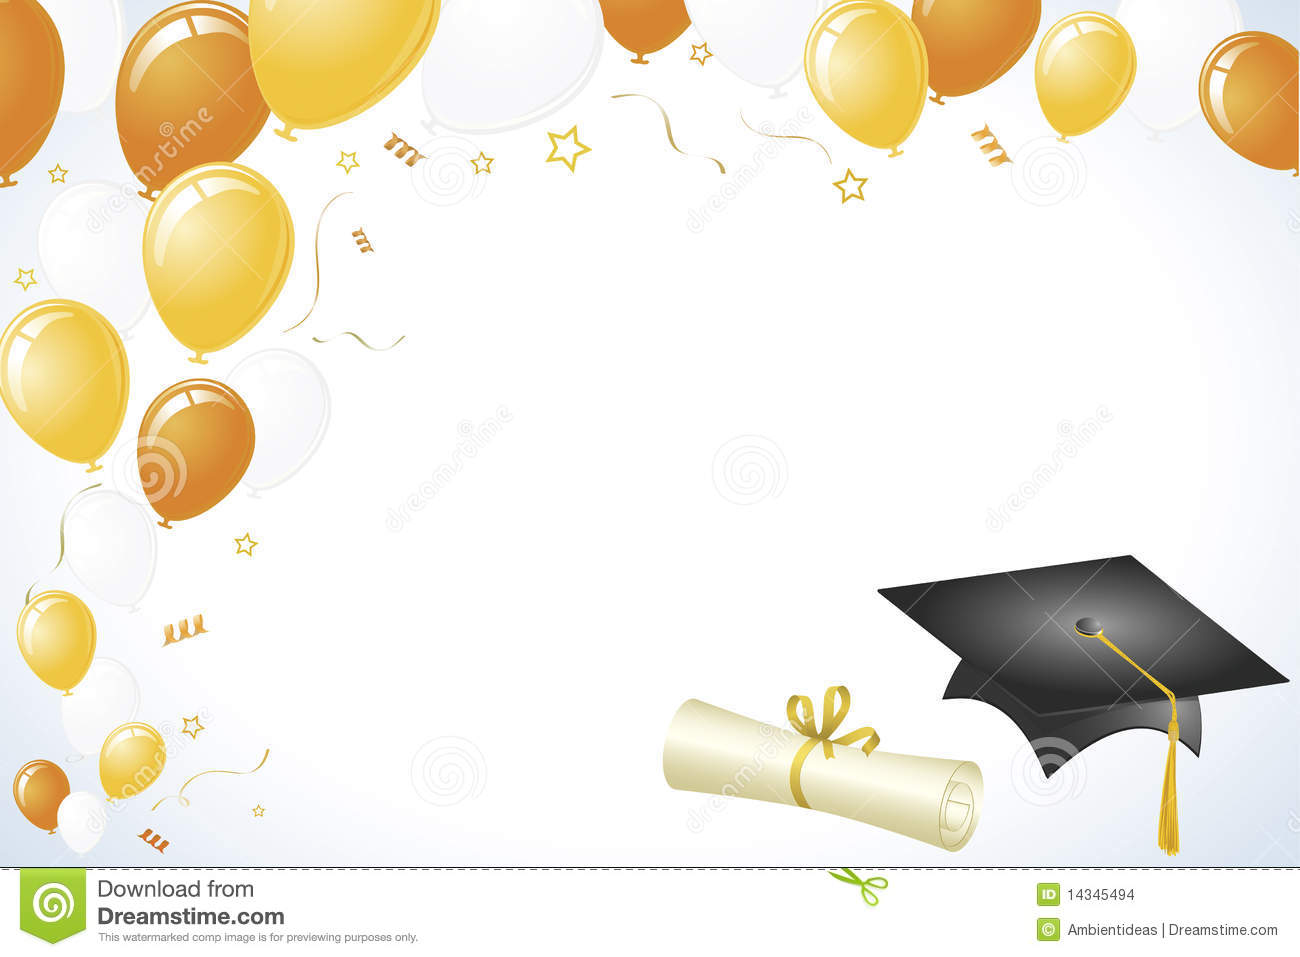 Graduation Design With Gold And Yellow Balloons Stock Images   Image